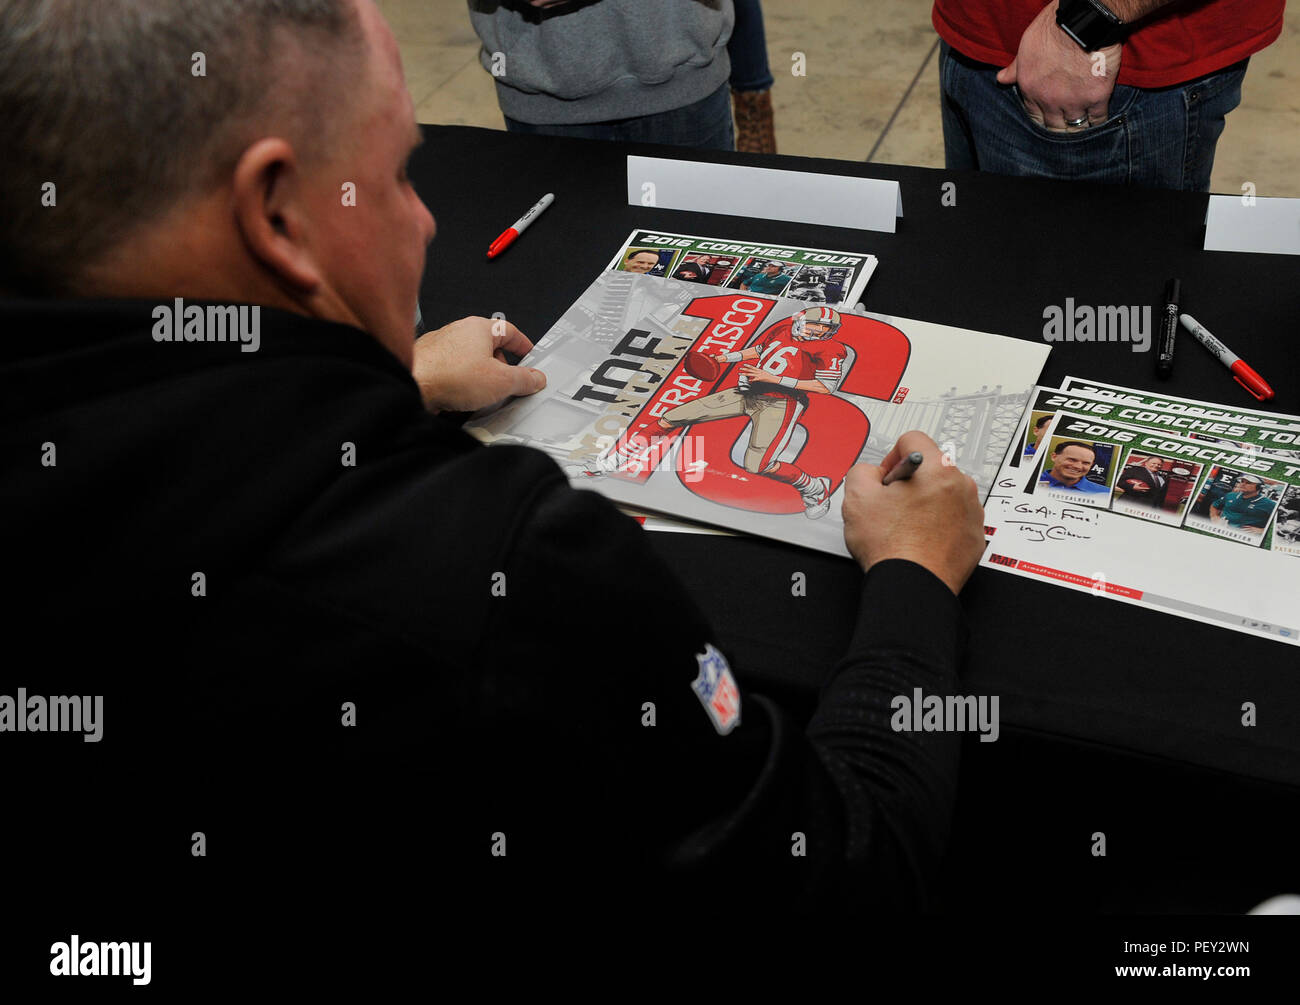 Chip Kelly, San Francisco 49ers head coach, signs his autograph for a fan during the 2016 Coaches Tour Feb. 14, 2016, at Ramstein Air Base, Germany. The coaches took time to travel here to meet with fans, sign autographs and have lunch with wounded warriors. (U.S. Air Force photo/Airman 1st Class Larissa Greatwood) Stock Photo